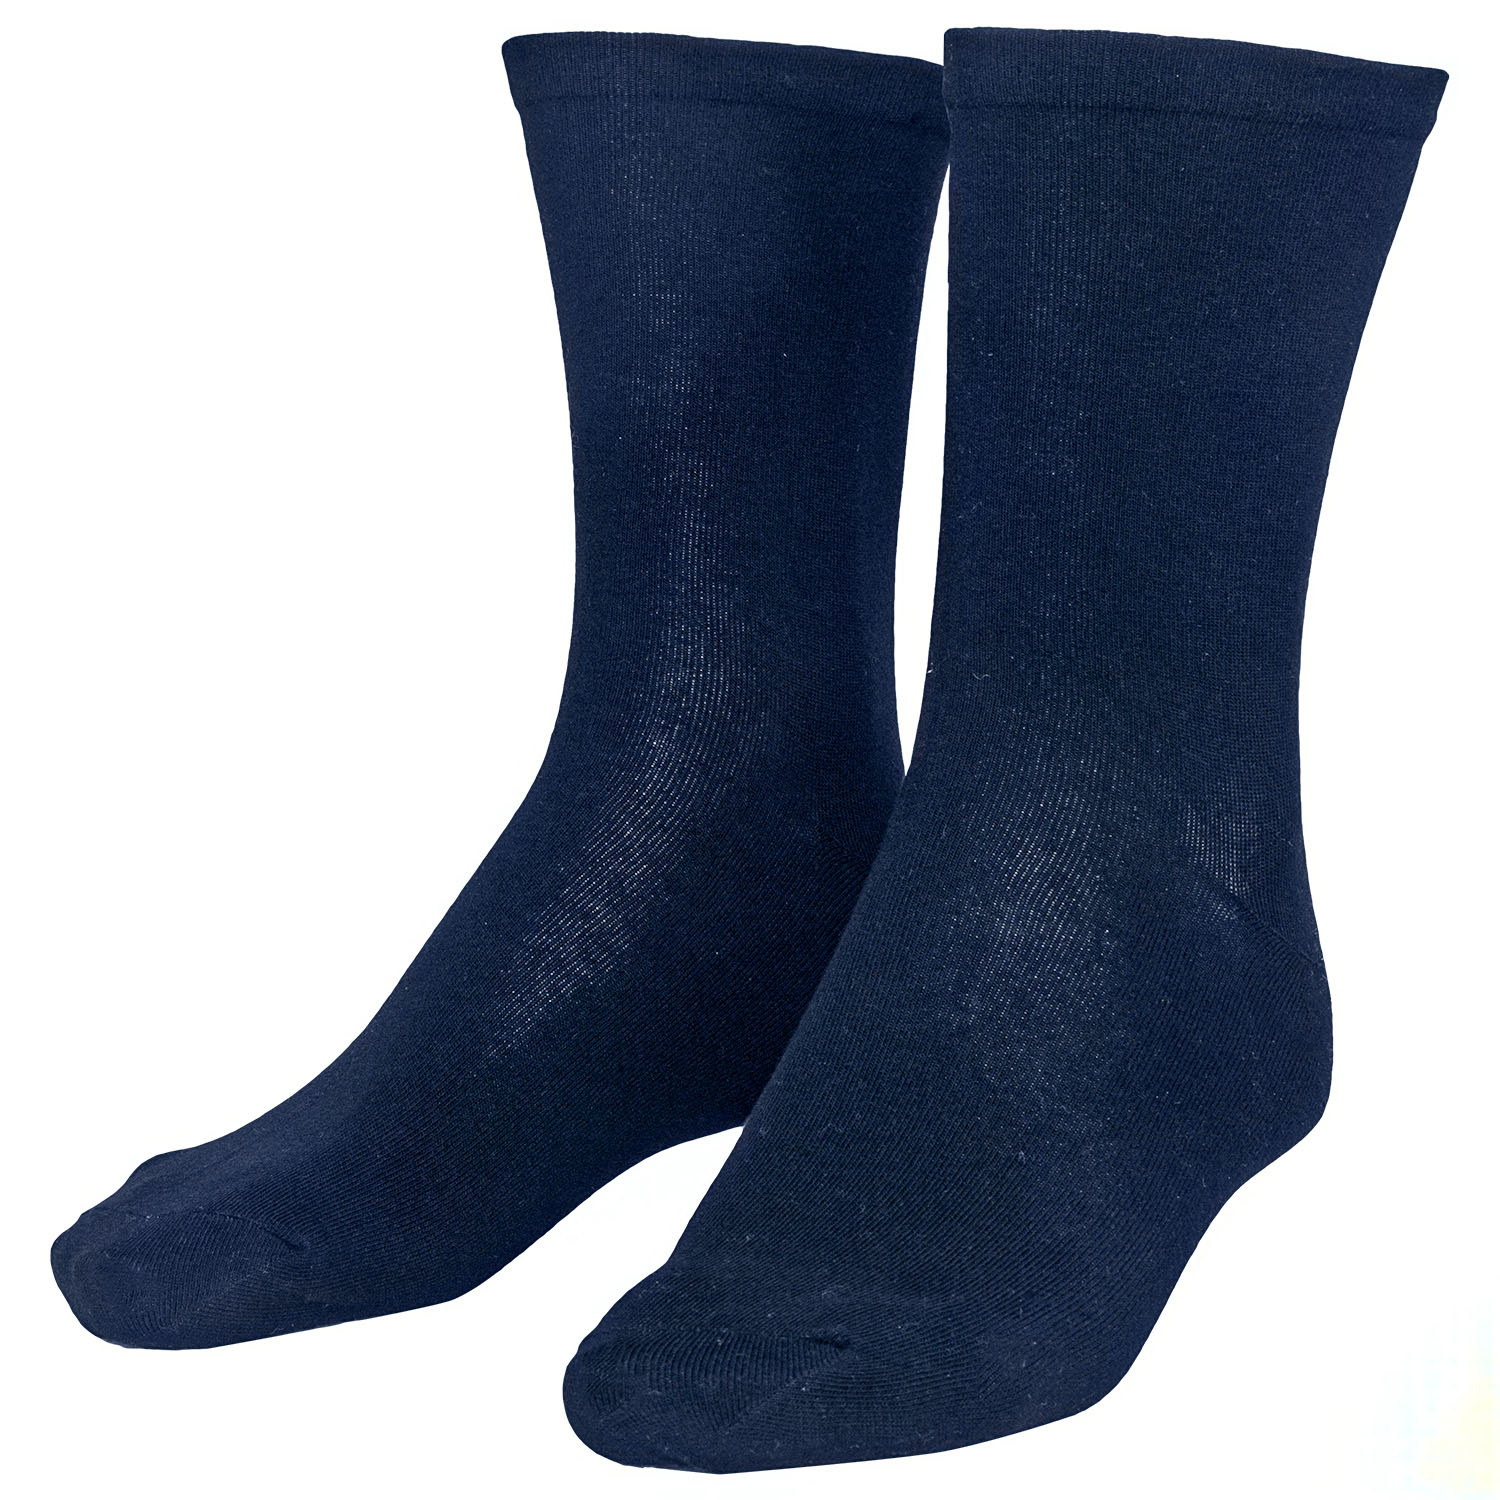 Sock sensitive in navy men double pack up to size 51/54